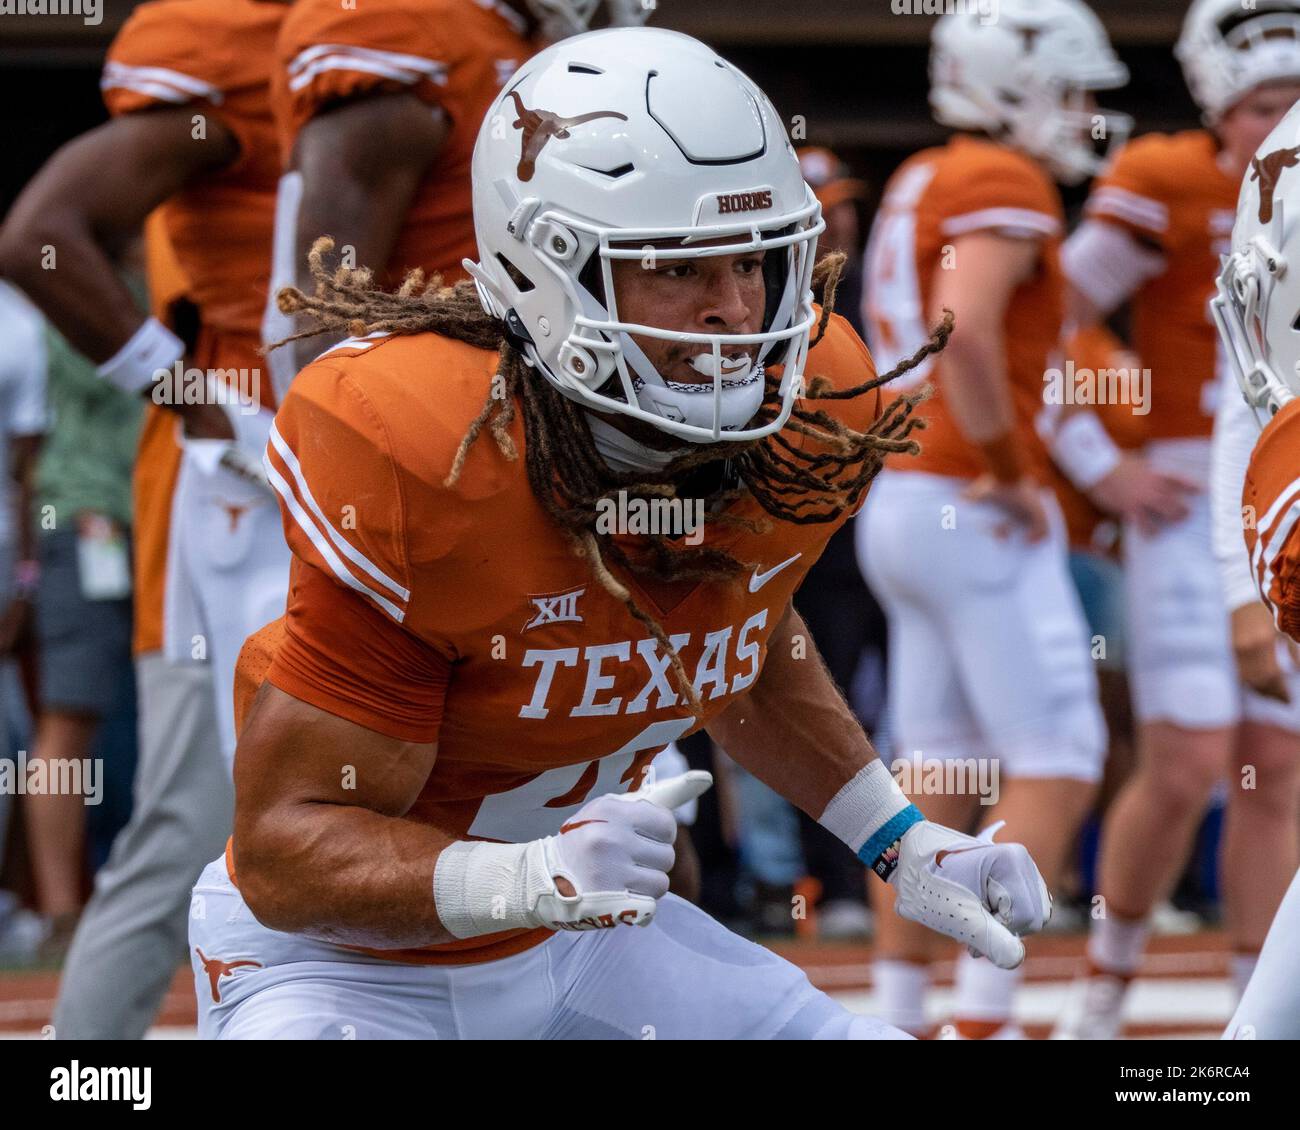 October 15, 2022. WR-H Jordan Whittington # 4 of the Texas Longhorns warming up before the game vs the Iowa State Cyclones at DKR-Memorial Stadium. Credit: Cal Sport Media/Alamy Live News Stock Photo